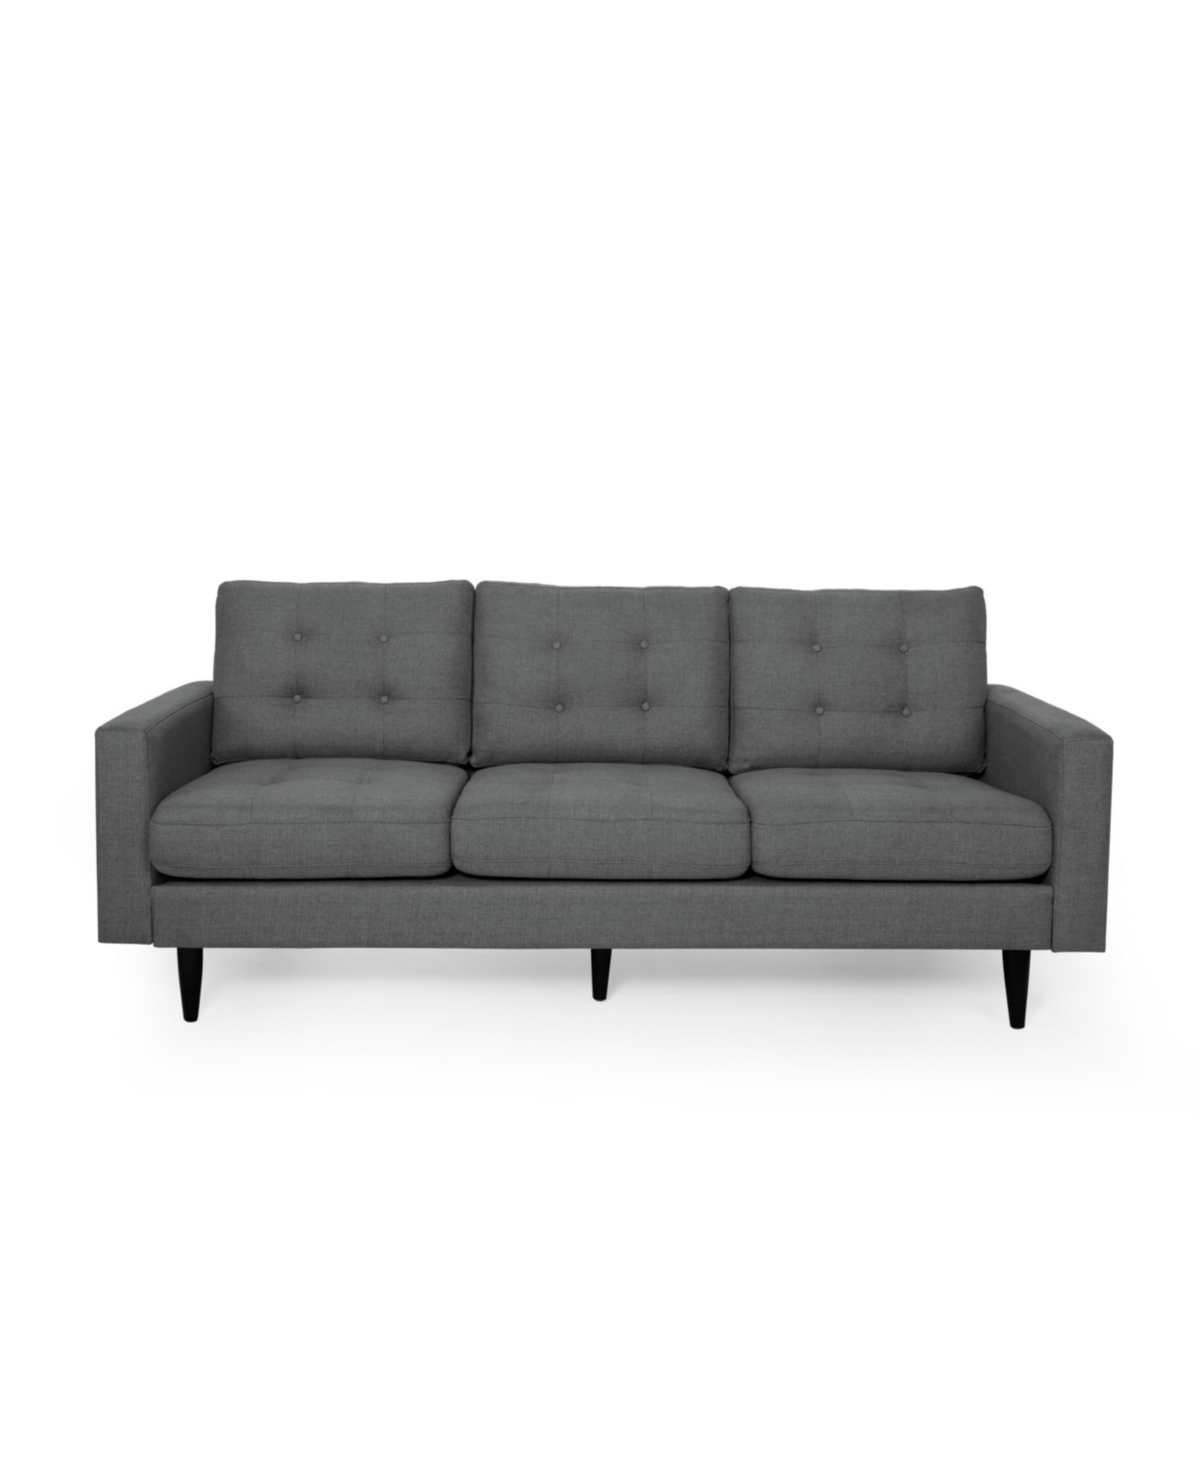 Noble House Adderbury Contemporary Tufted 3 Seater Sofa In Dark Gray